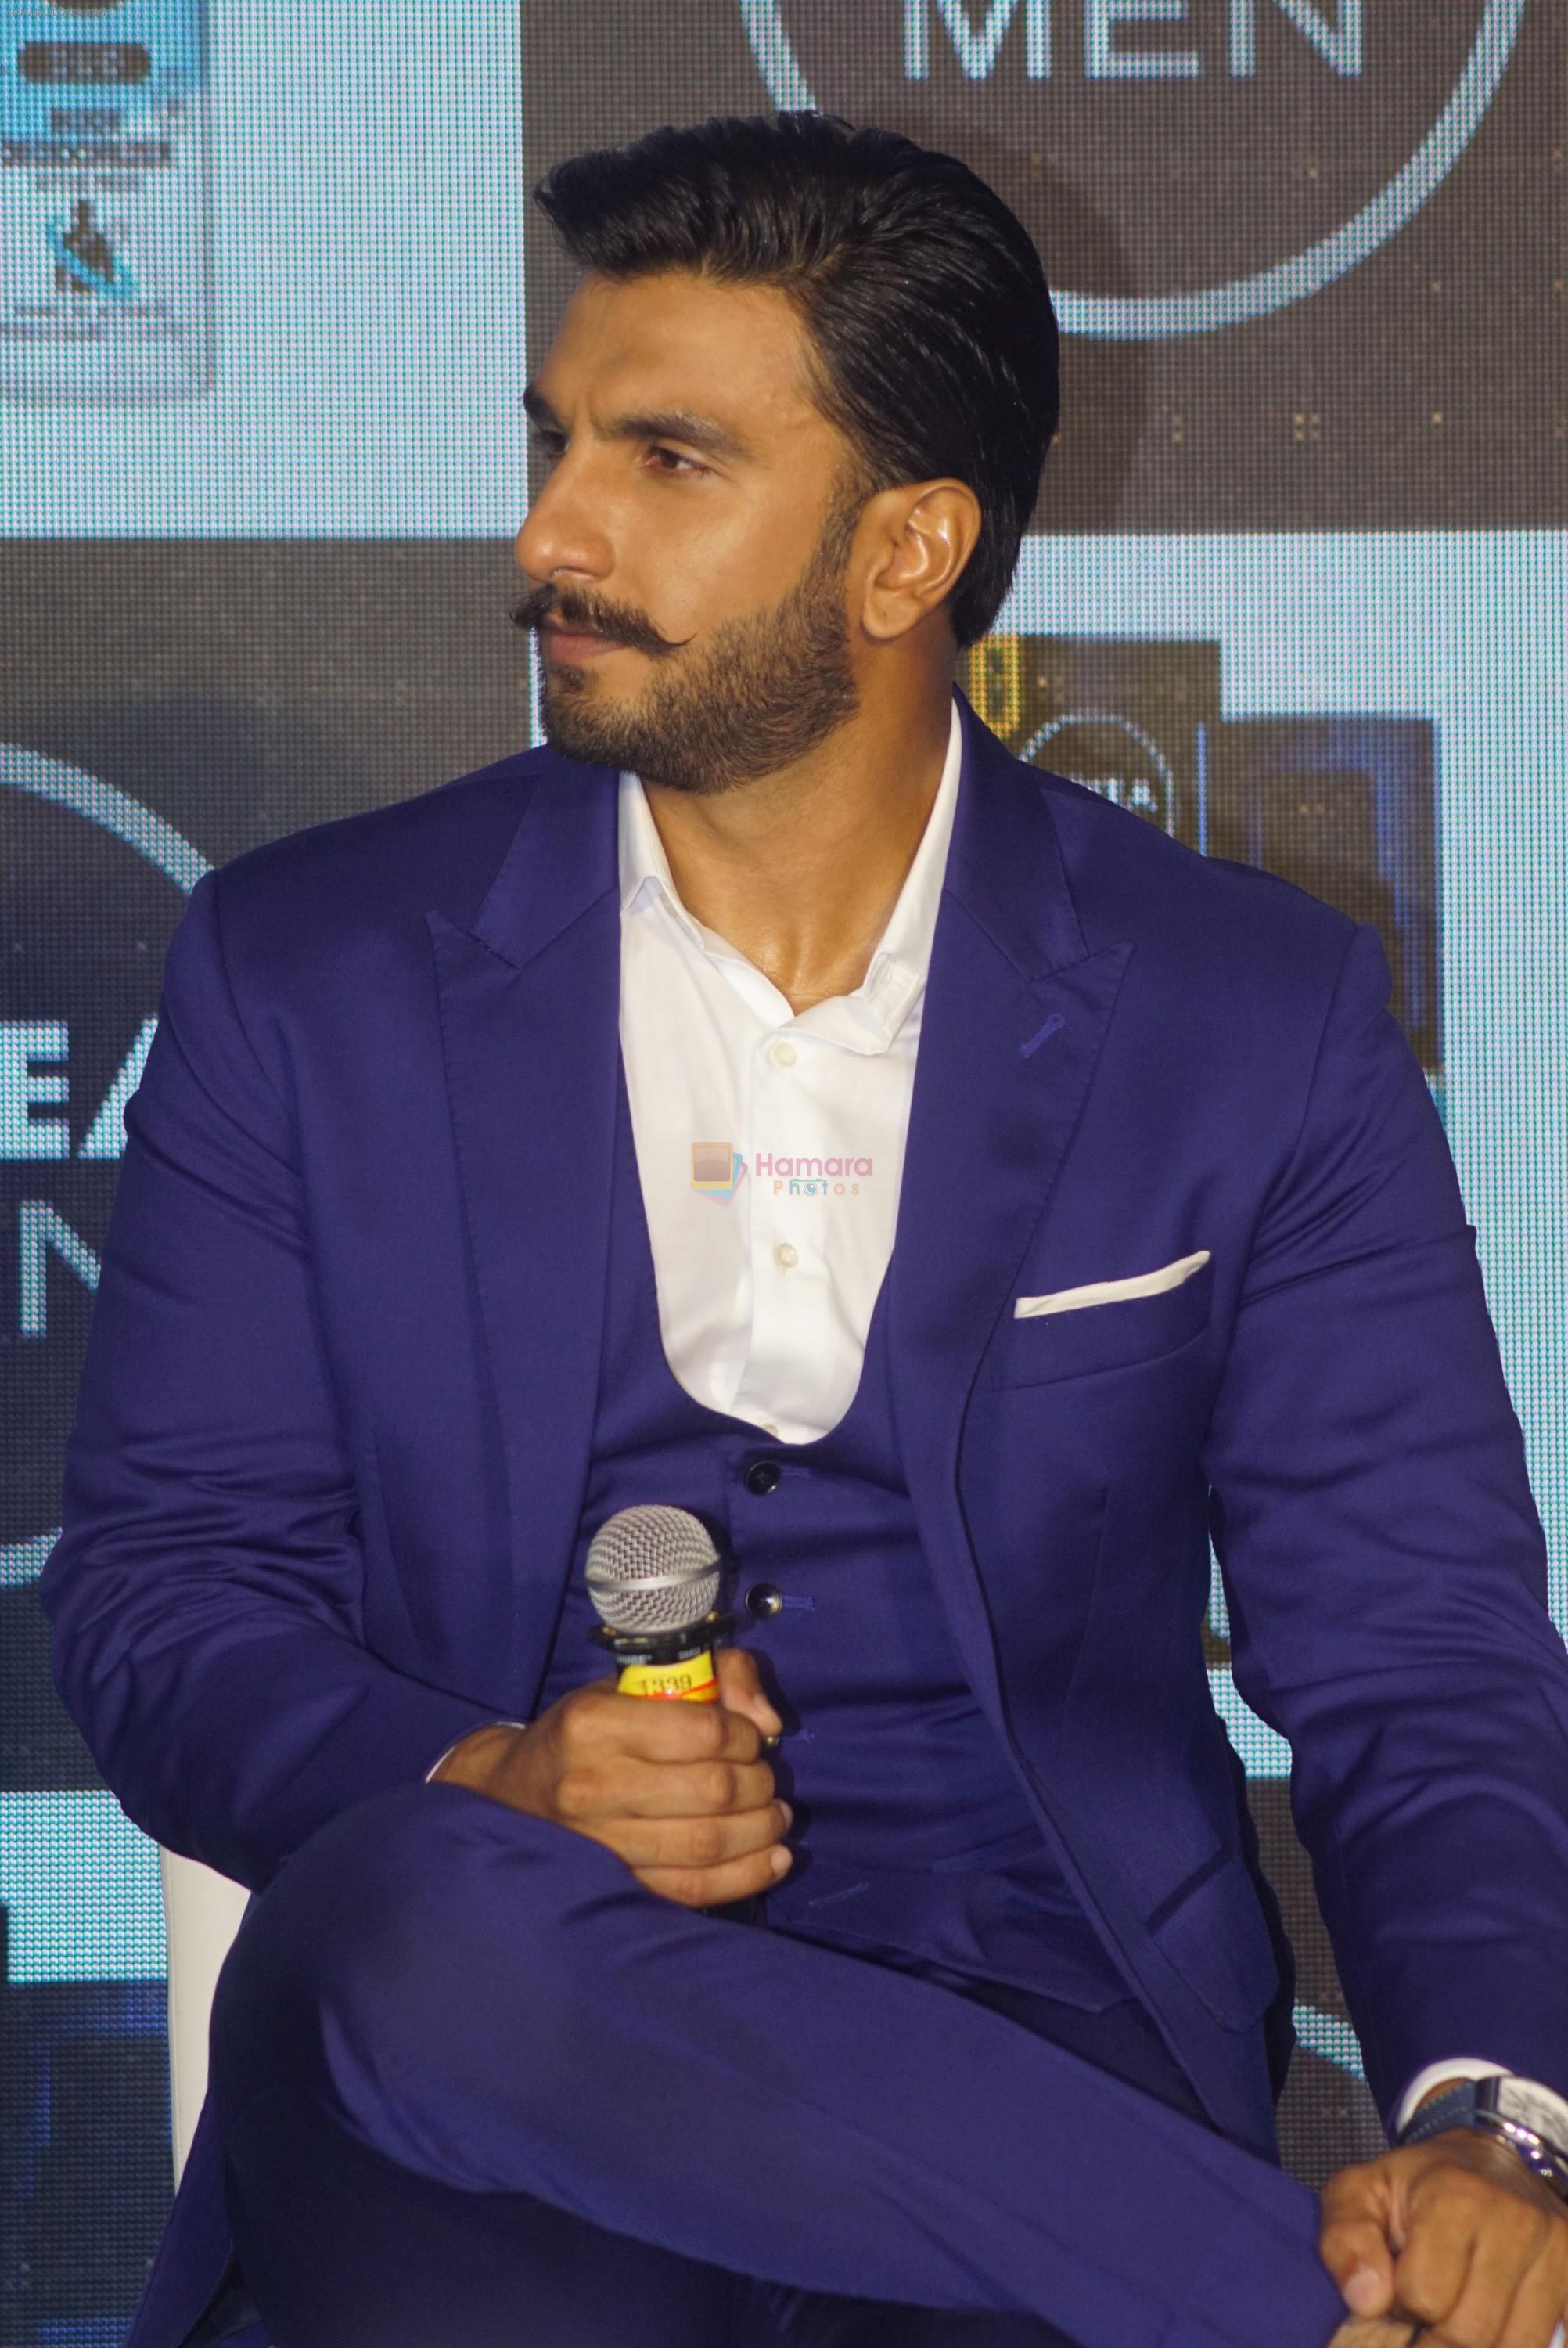 Ranveer singh announced as new face of NIVEA Men on 4th Aug 2018